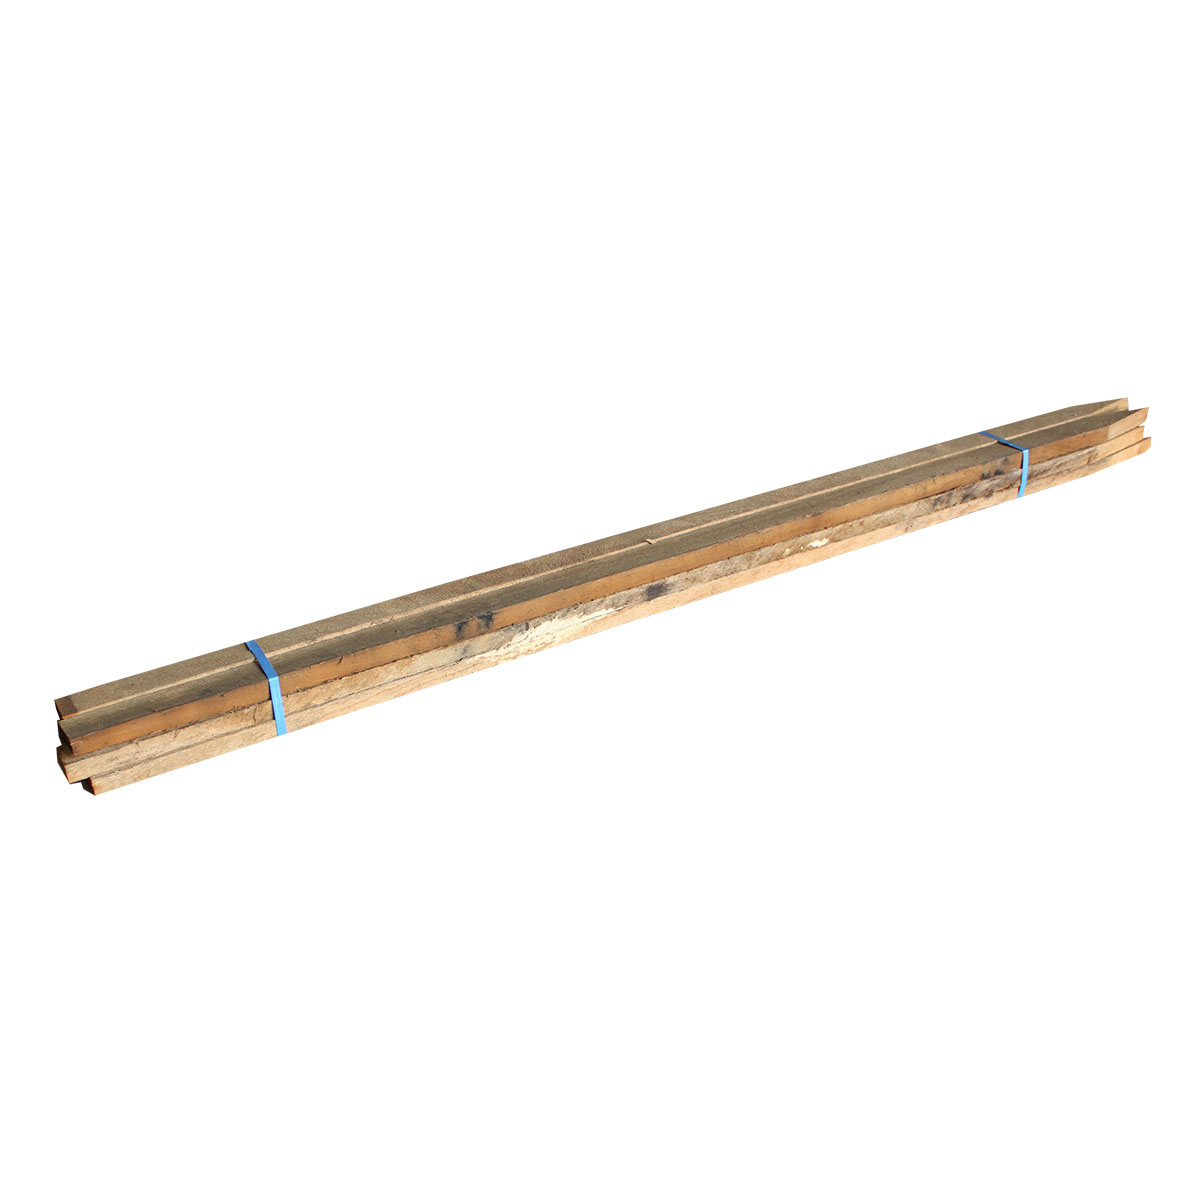 Hardwood Stakes 50 x 25 x 1500mm - 6 Pack